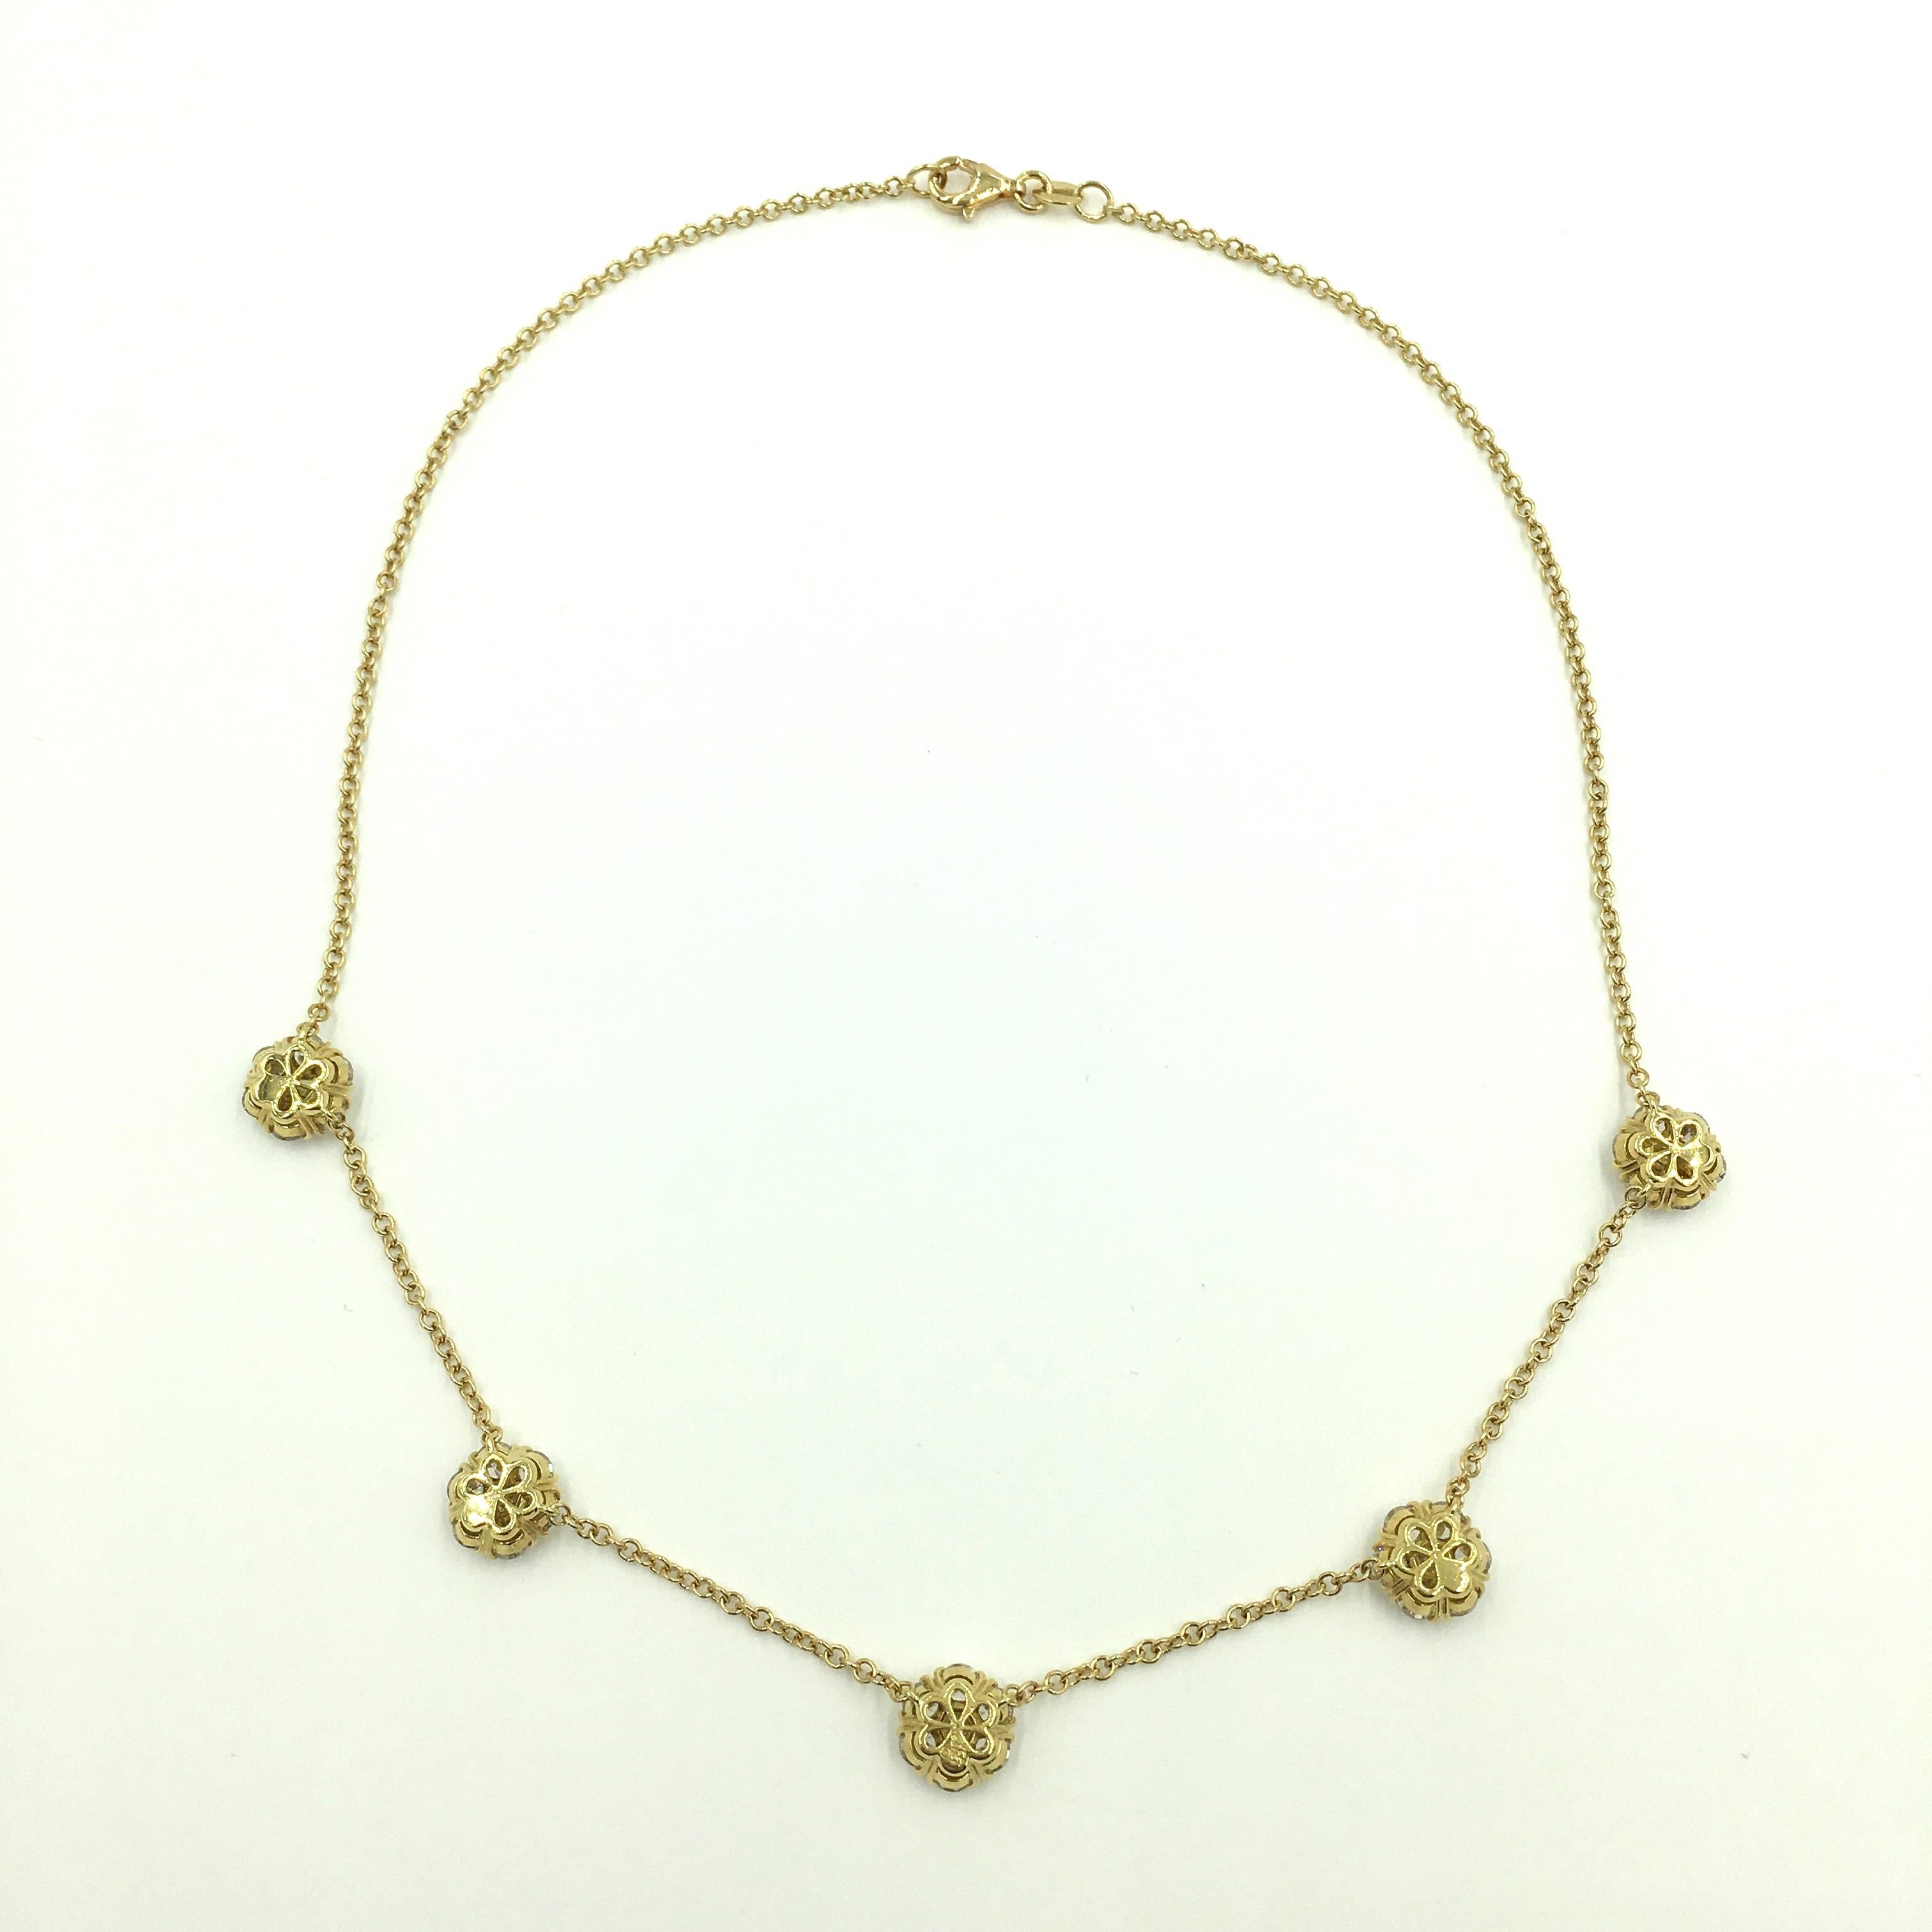 An 18 karat yellow gold and diamond large Fleurette necklace. Van Cleef & Arpels. Designed as a fine link chain, set with five (5) circular cut diamond flouretts, Thirty five diamonds weigh approximately 4.70 carats. Length is approximately 16